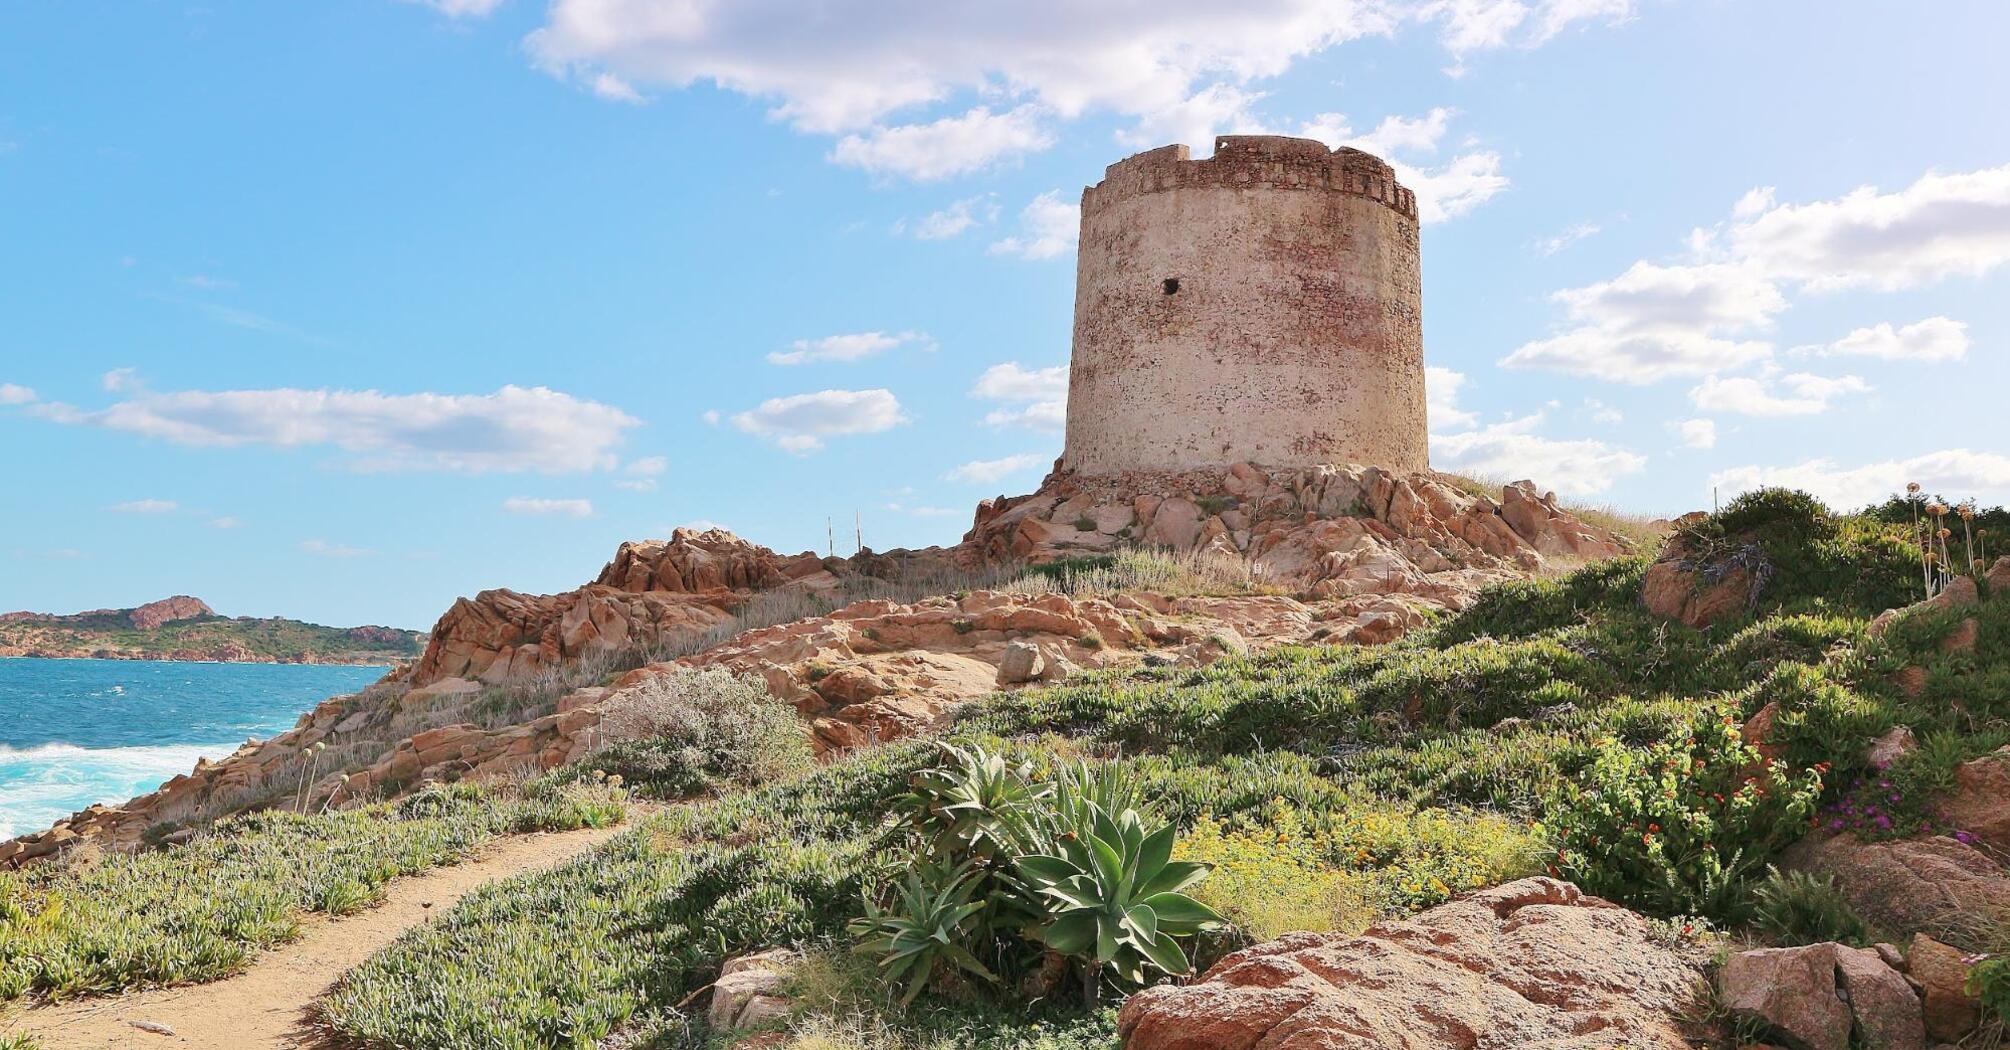 An ancient tower on the Sardinian coast, perched above the rocks and sea